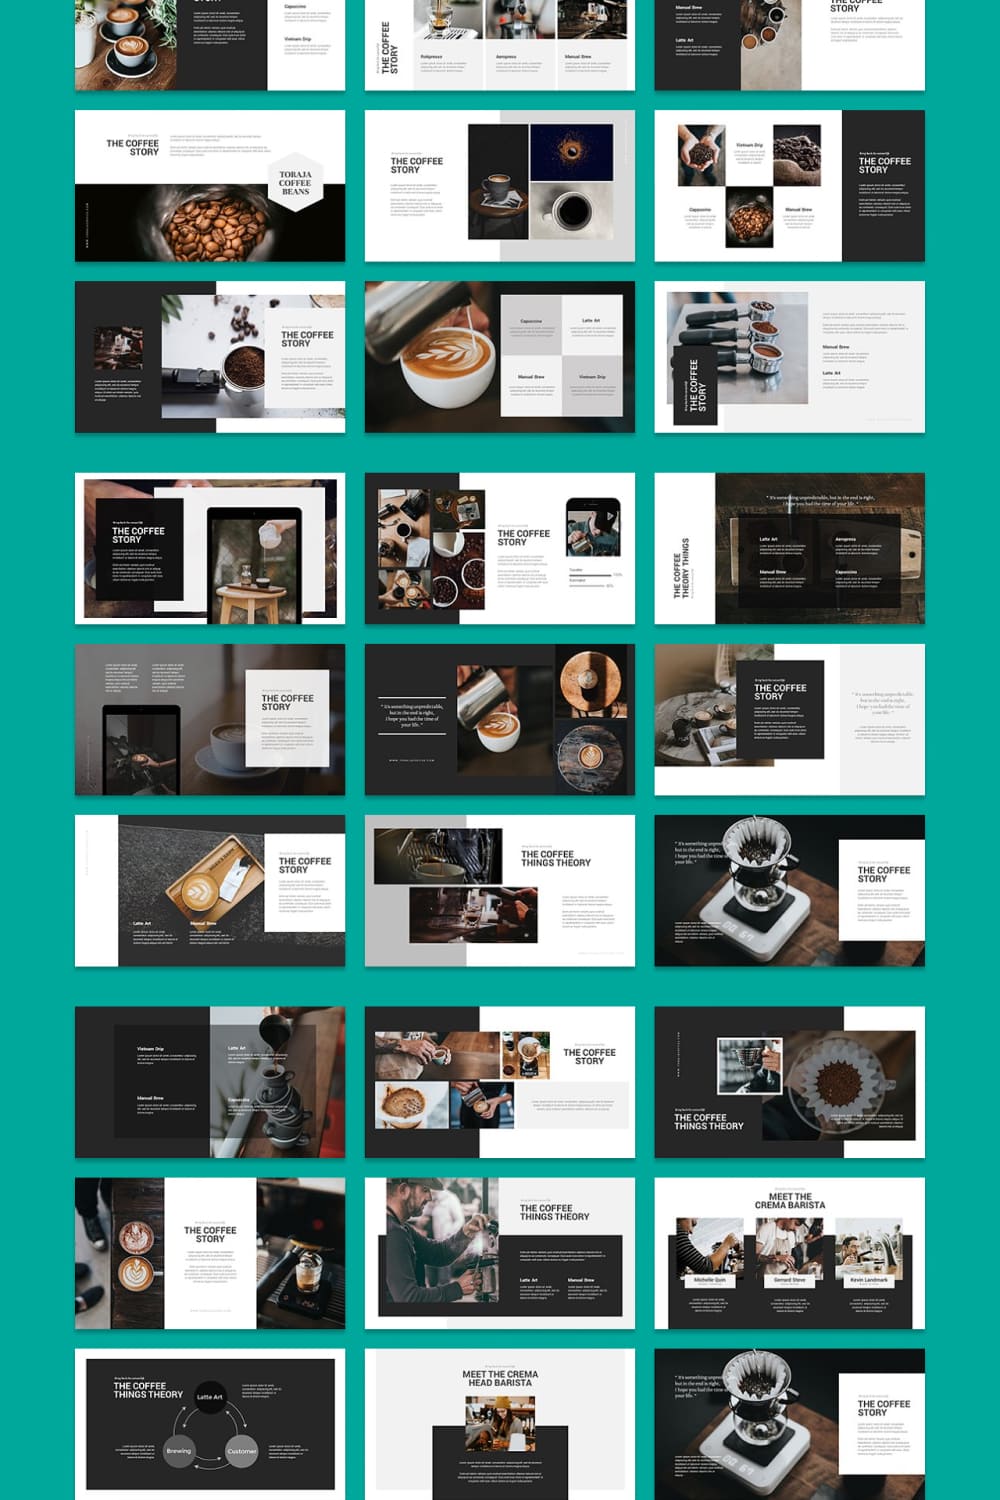 This Presentation Template contains Modern, Elegant, creative, Professional and unique layouts.